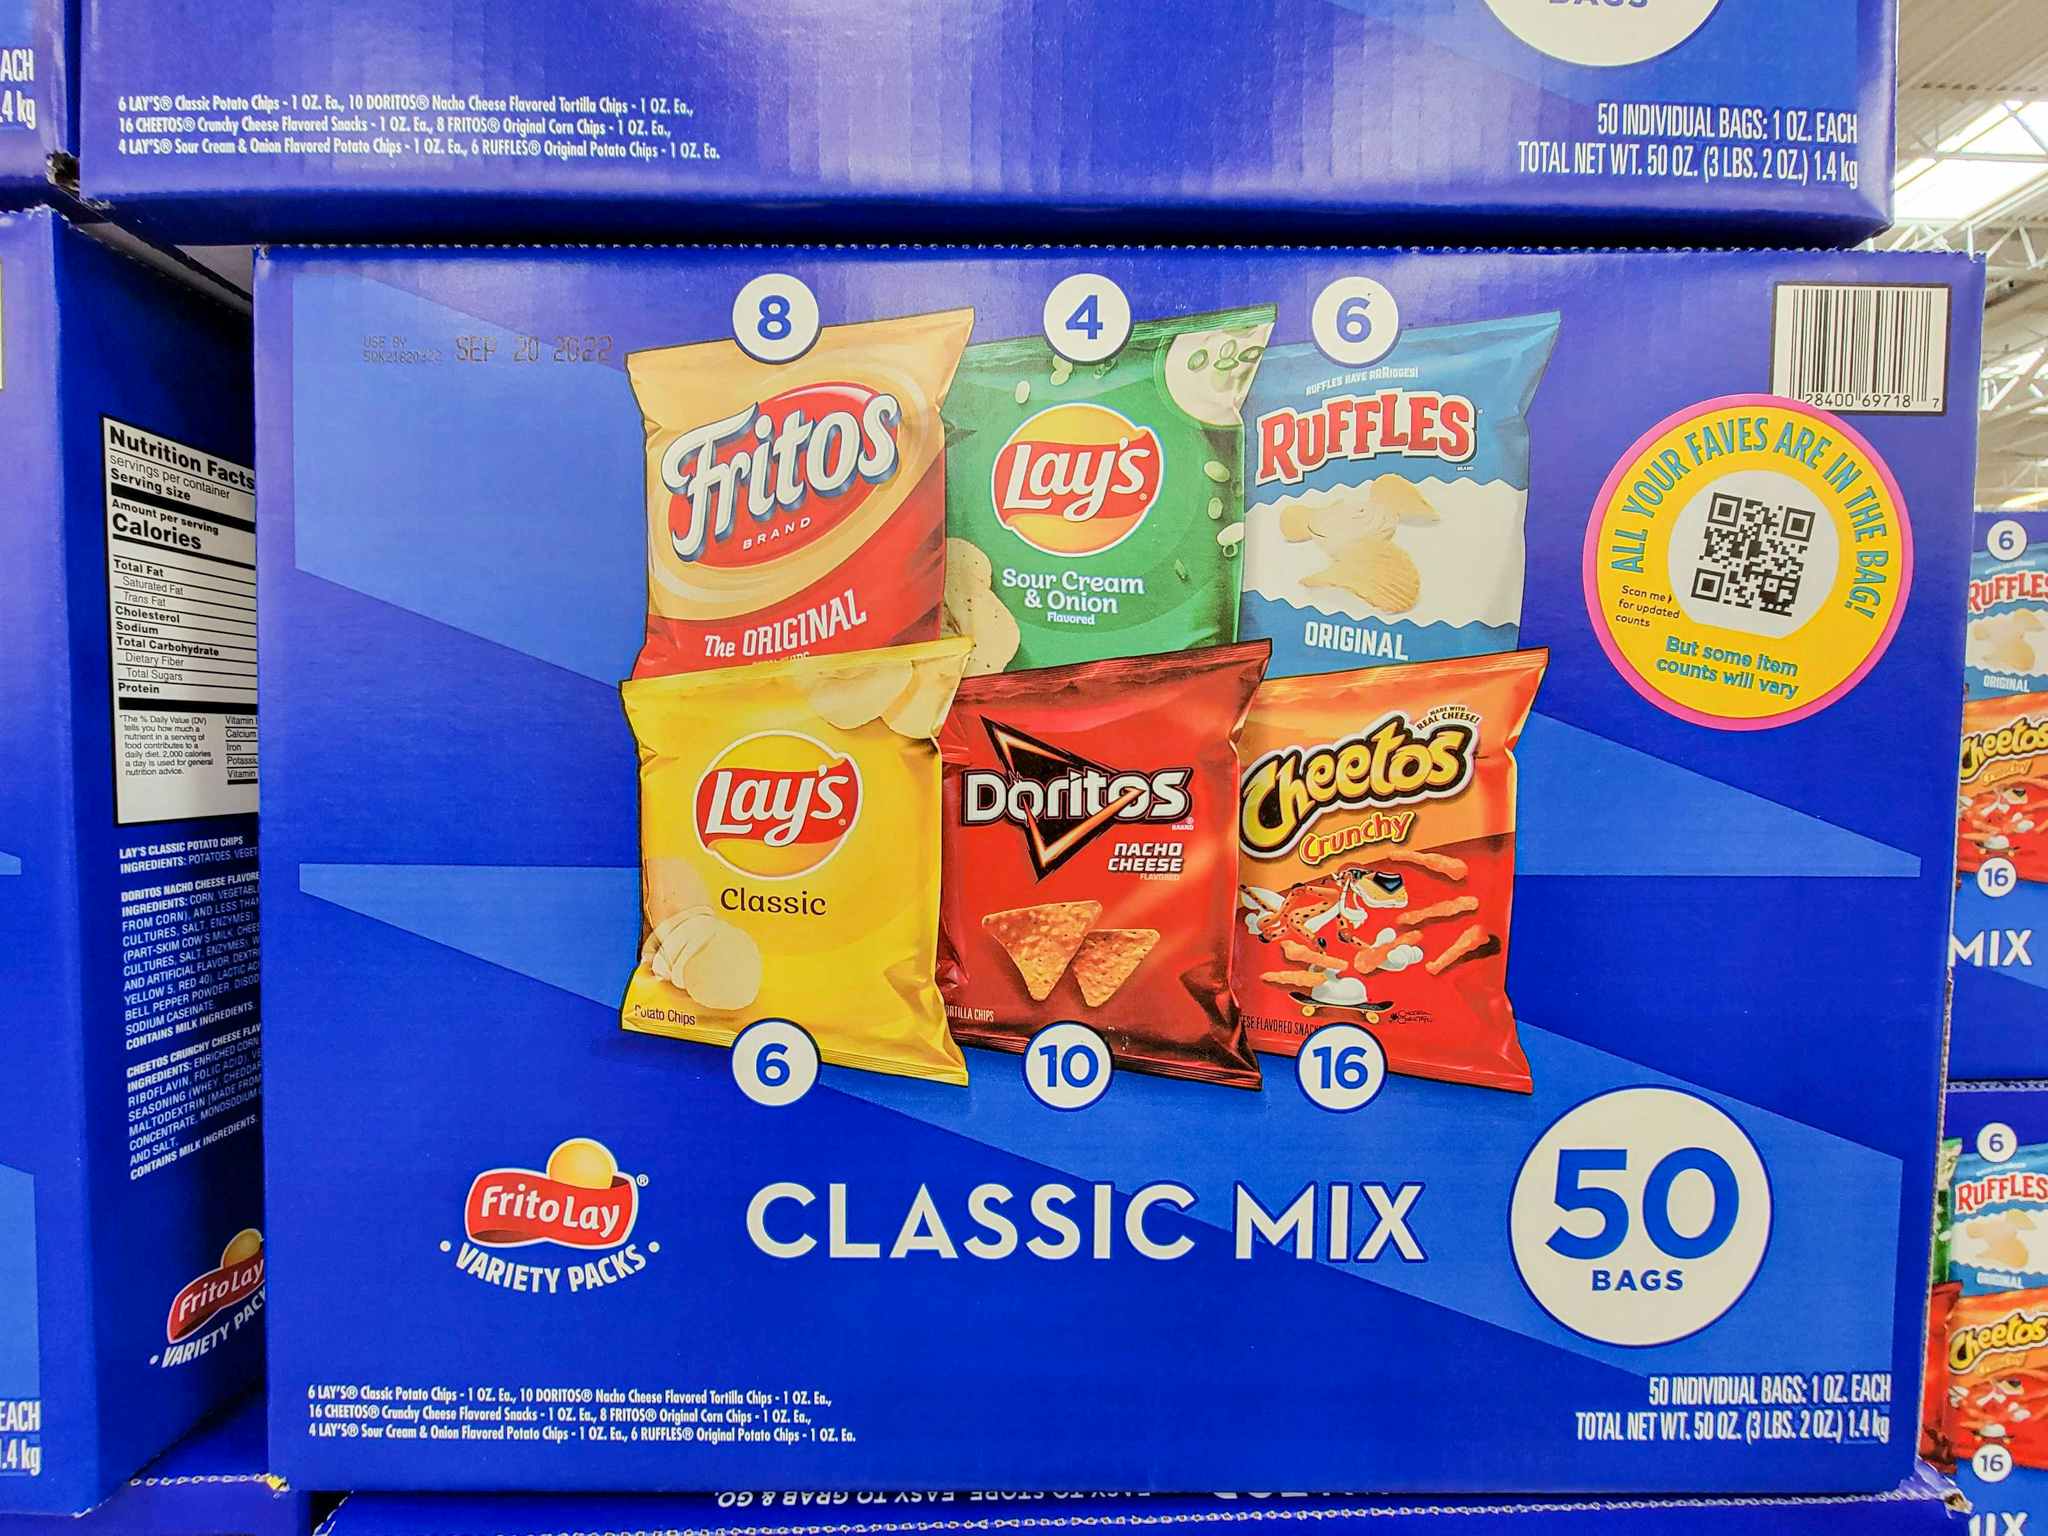 frito lay classic mix variety packs with 50 bags of chips